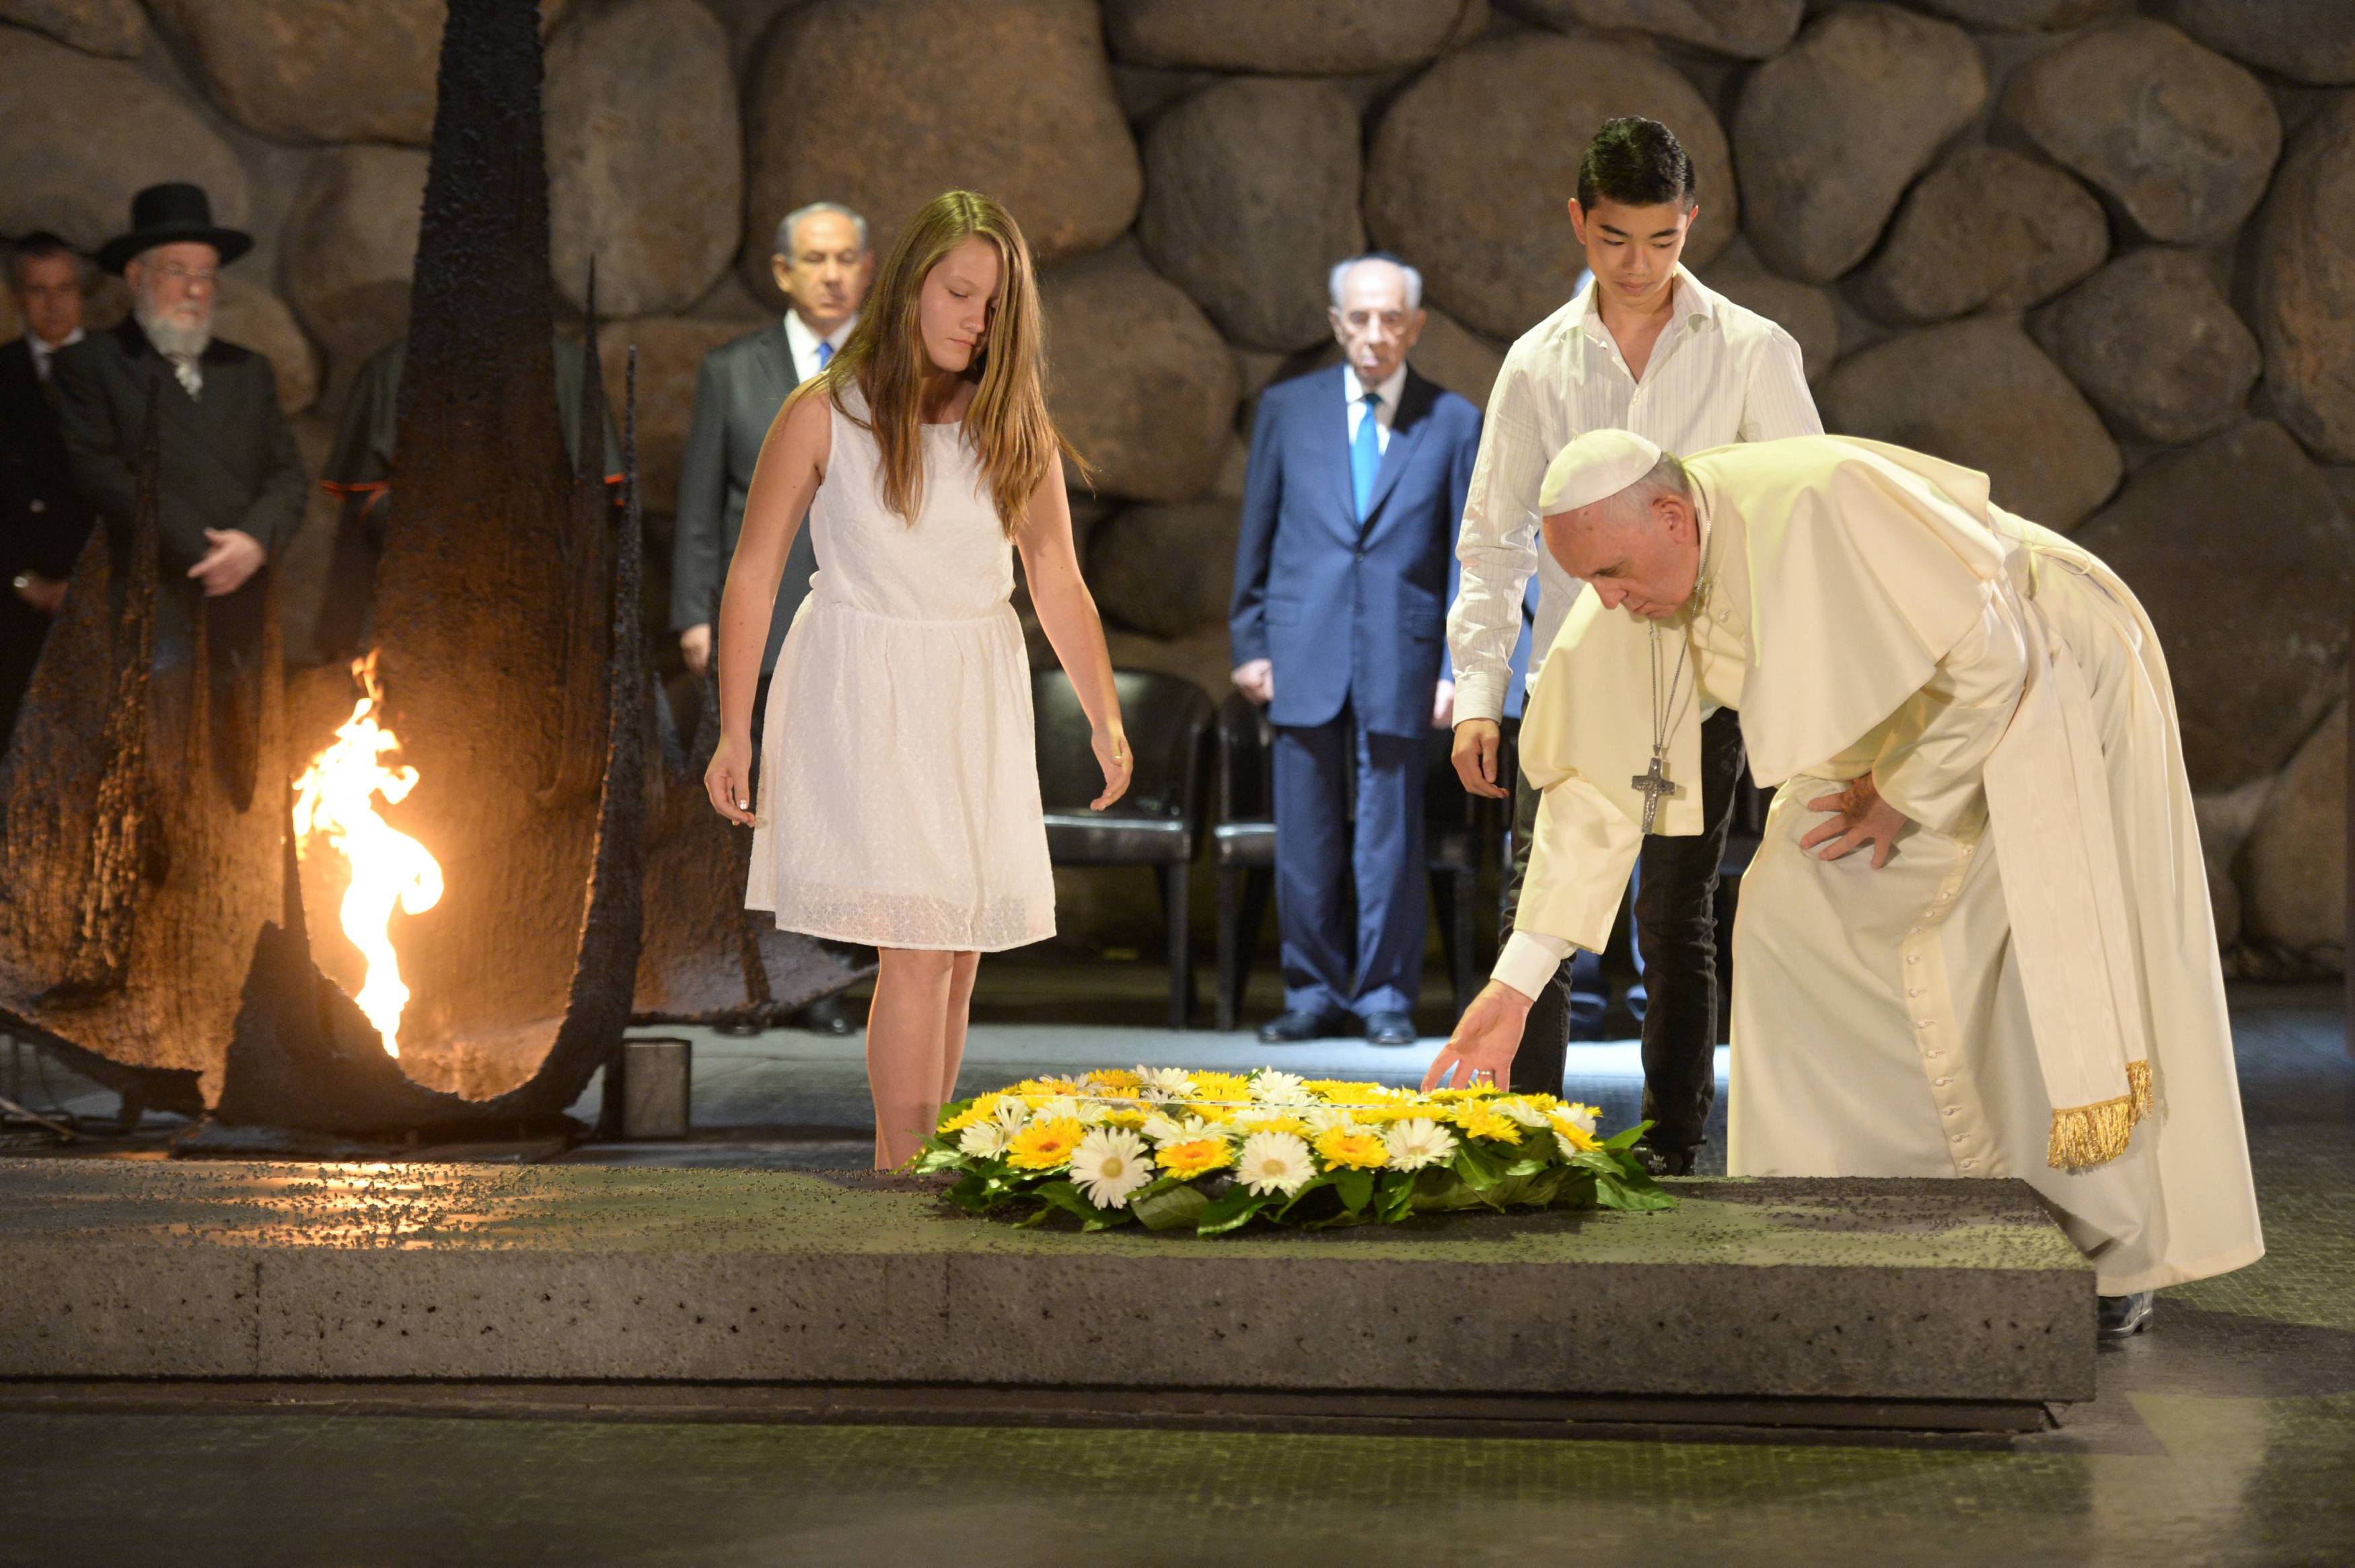 Pope Francis' visit to the Yad Vashem Holocaust Museum in Jerusalem, with President Shimon Peres and Prime Ministrer Benjamin Netanyahu. Photo: Amos Ben Gershom GPO